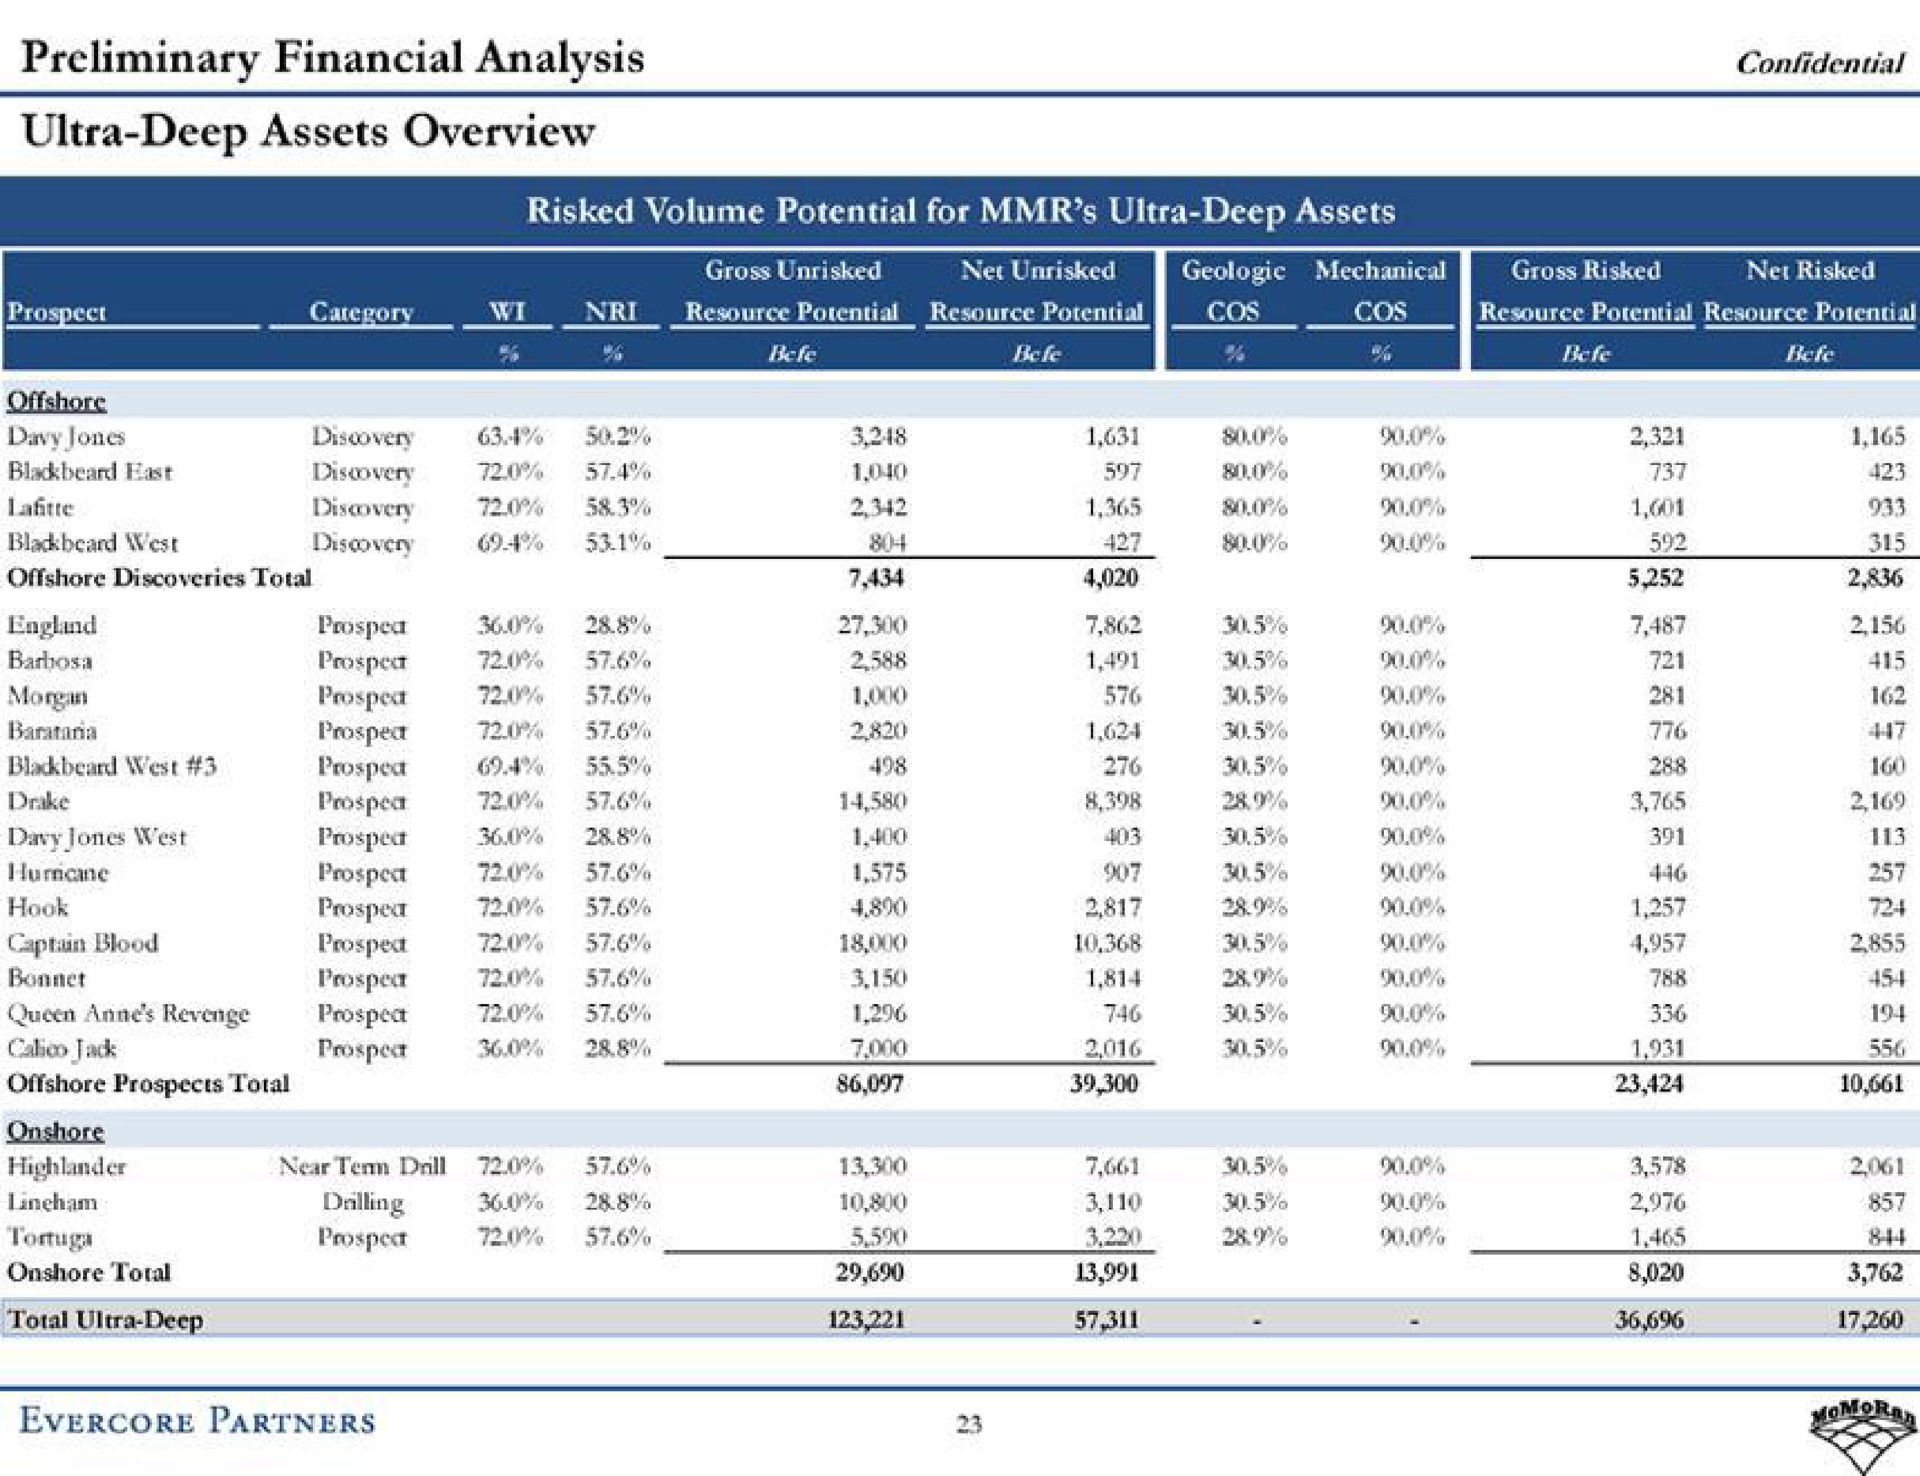 preliminary financial analysis ultra deep assets overview confidential partners | Evercore